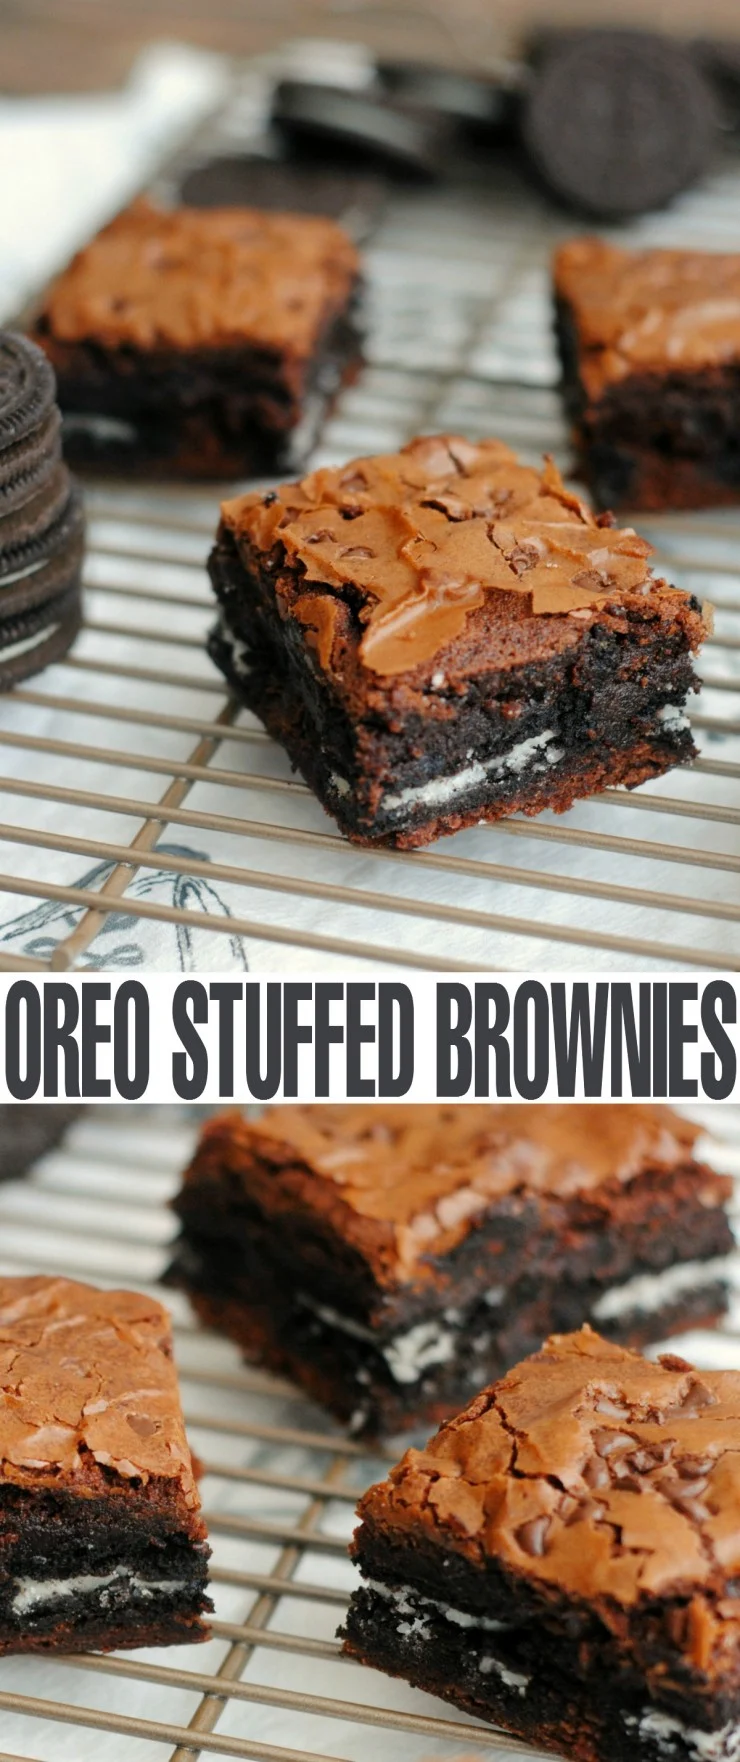  Delicious Oreo Stuffed Brownies - fudgy brownies layered with Oreos and topped with chocolate chips. Brownies don't get much better than this! 